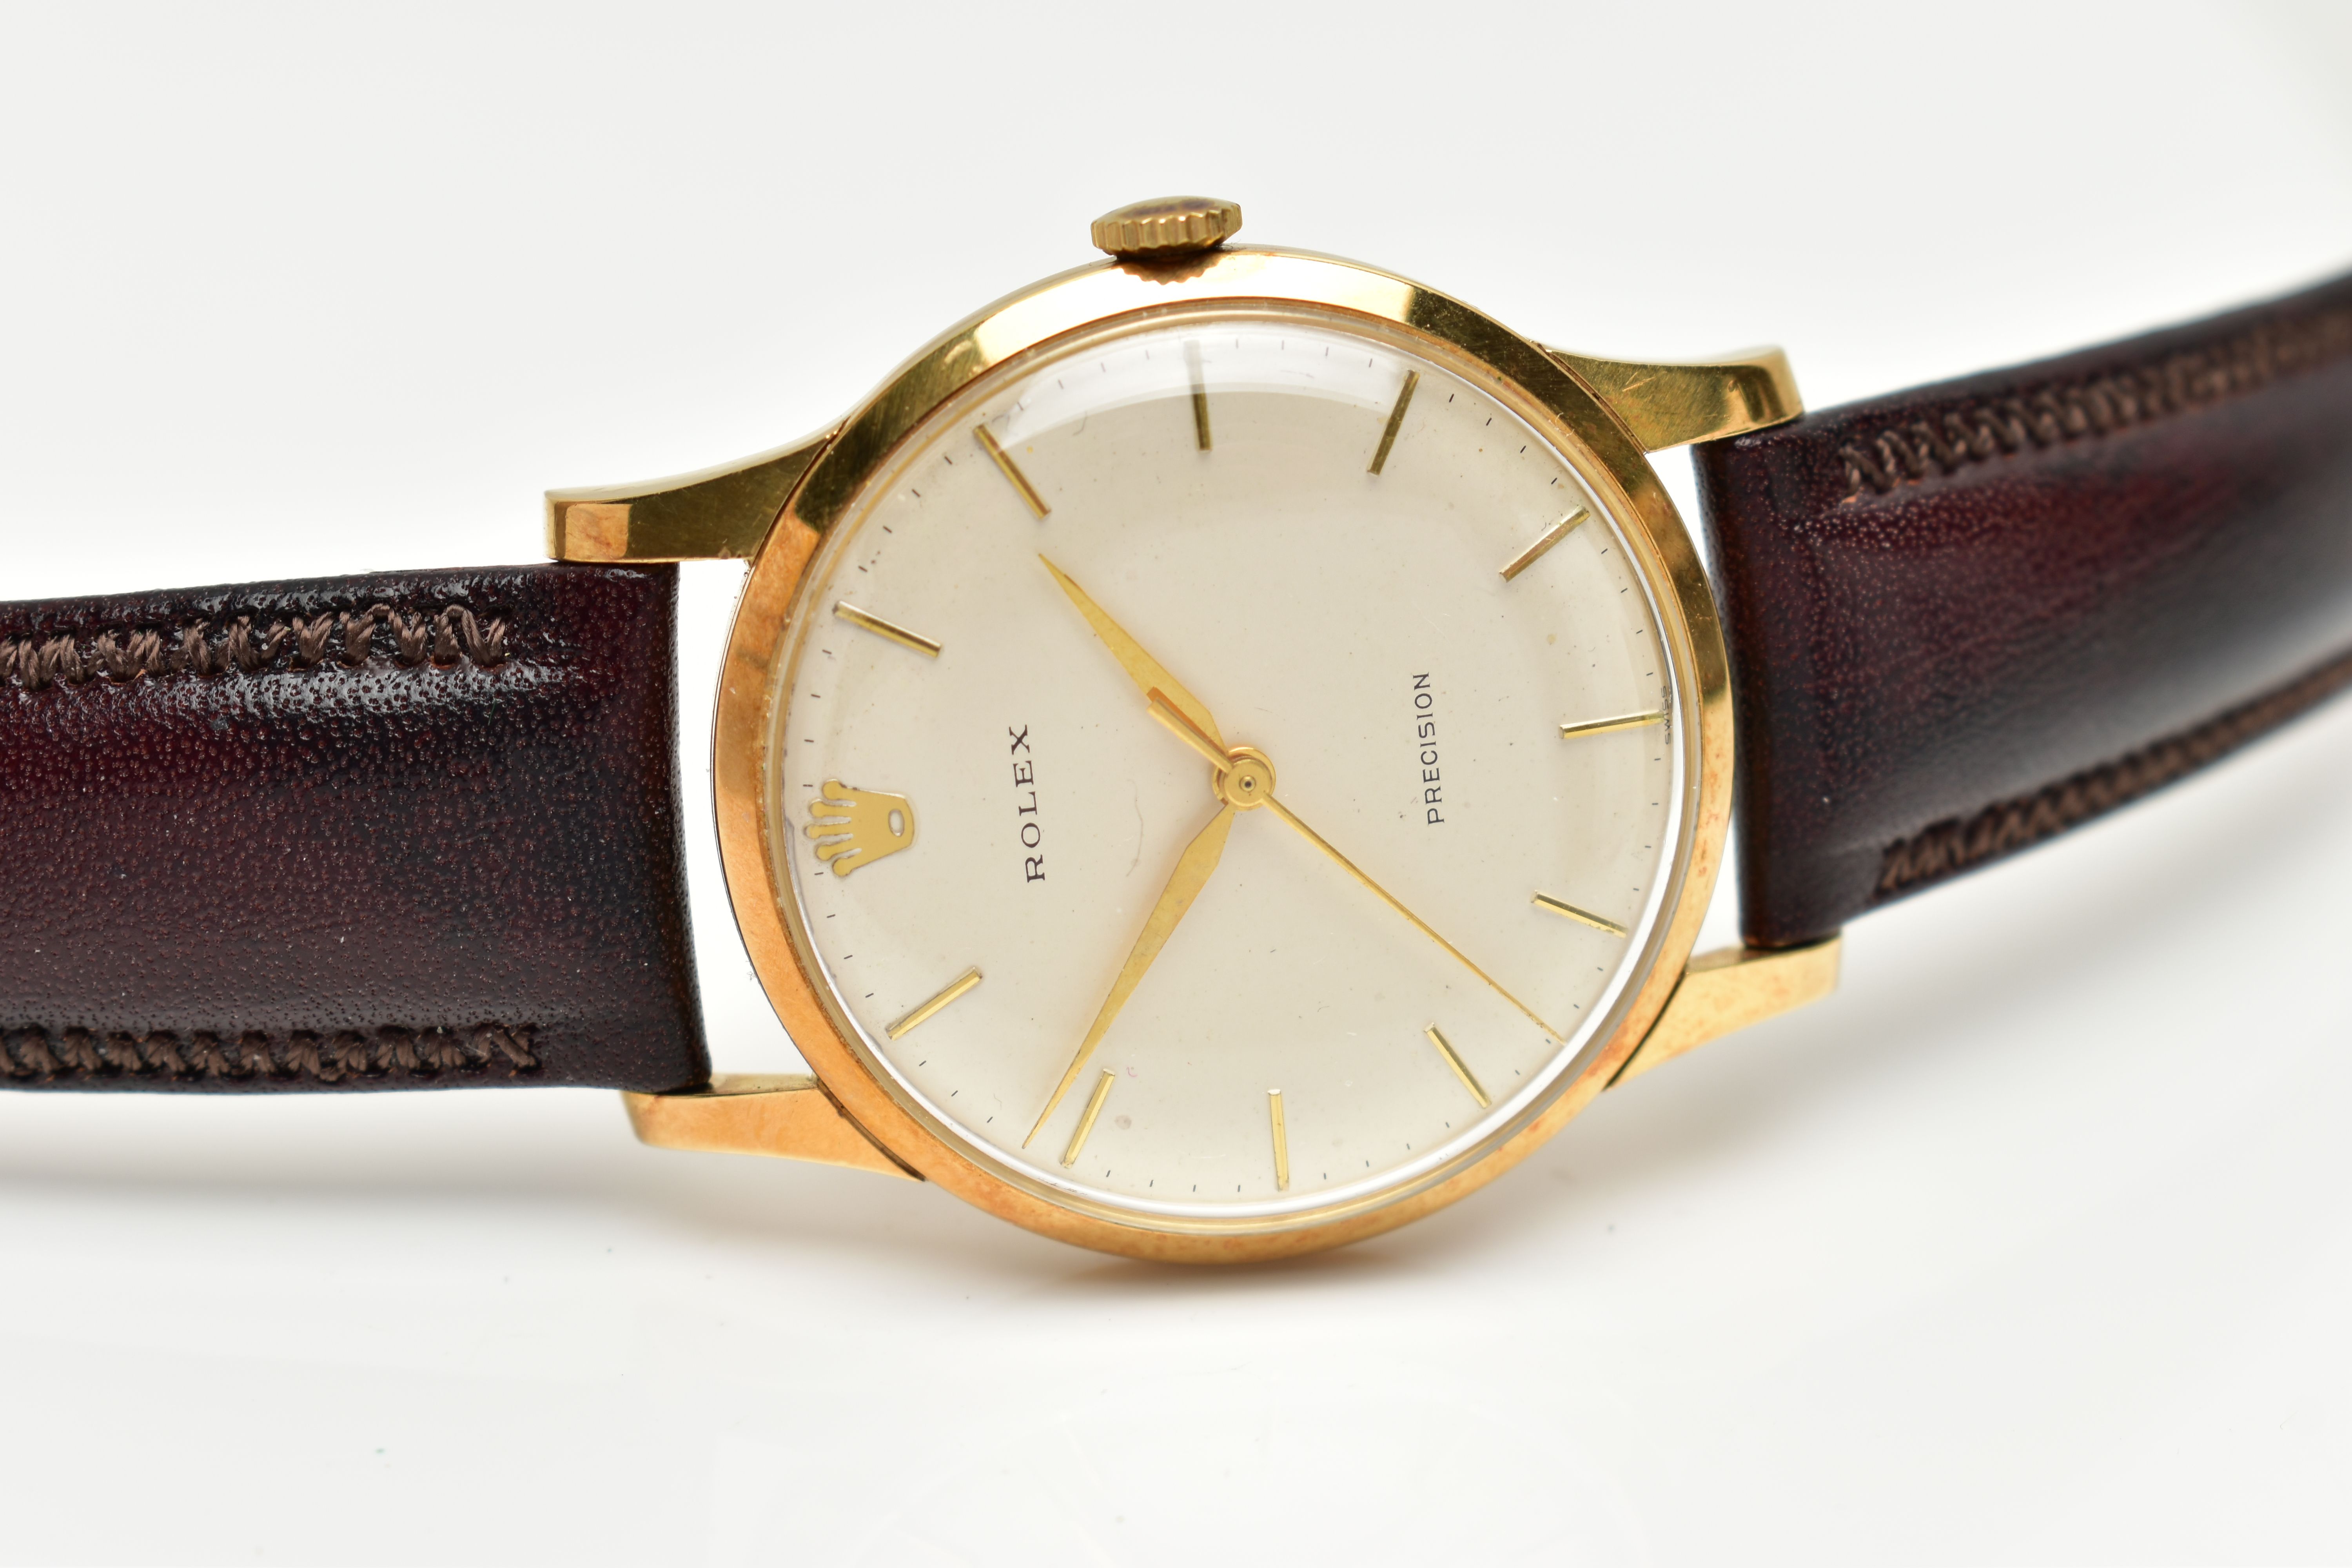 AN 18CT GOLD GENTS 'ROLEX, PRECISION' WRISTWATCH, hand wound movement, round dial, signed 'Rolex' - Image 4 of 7